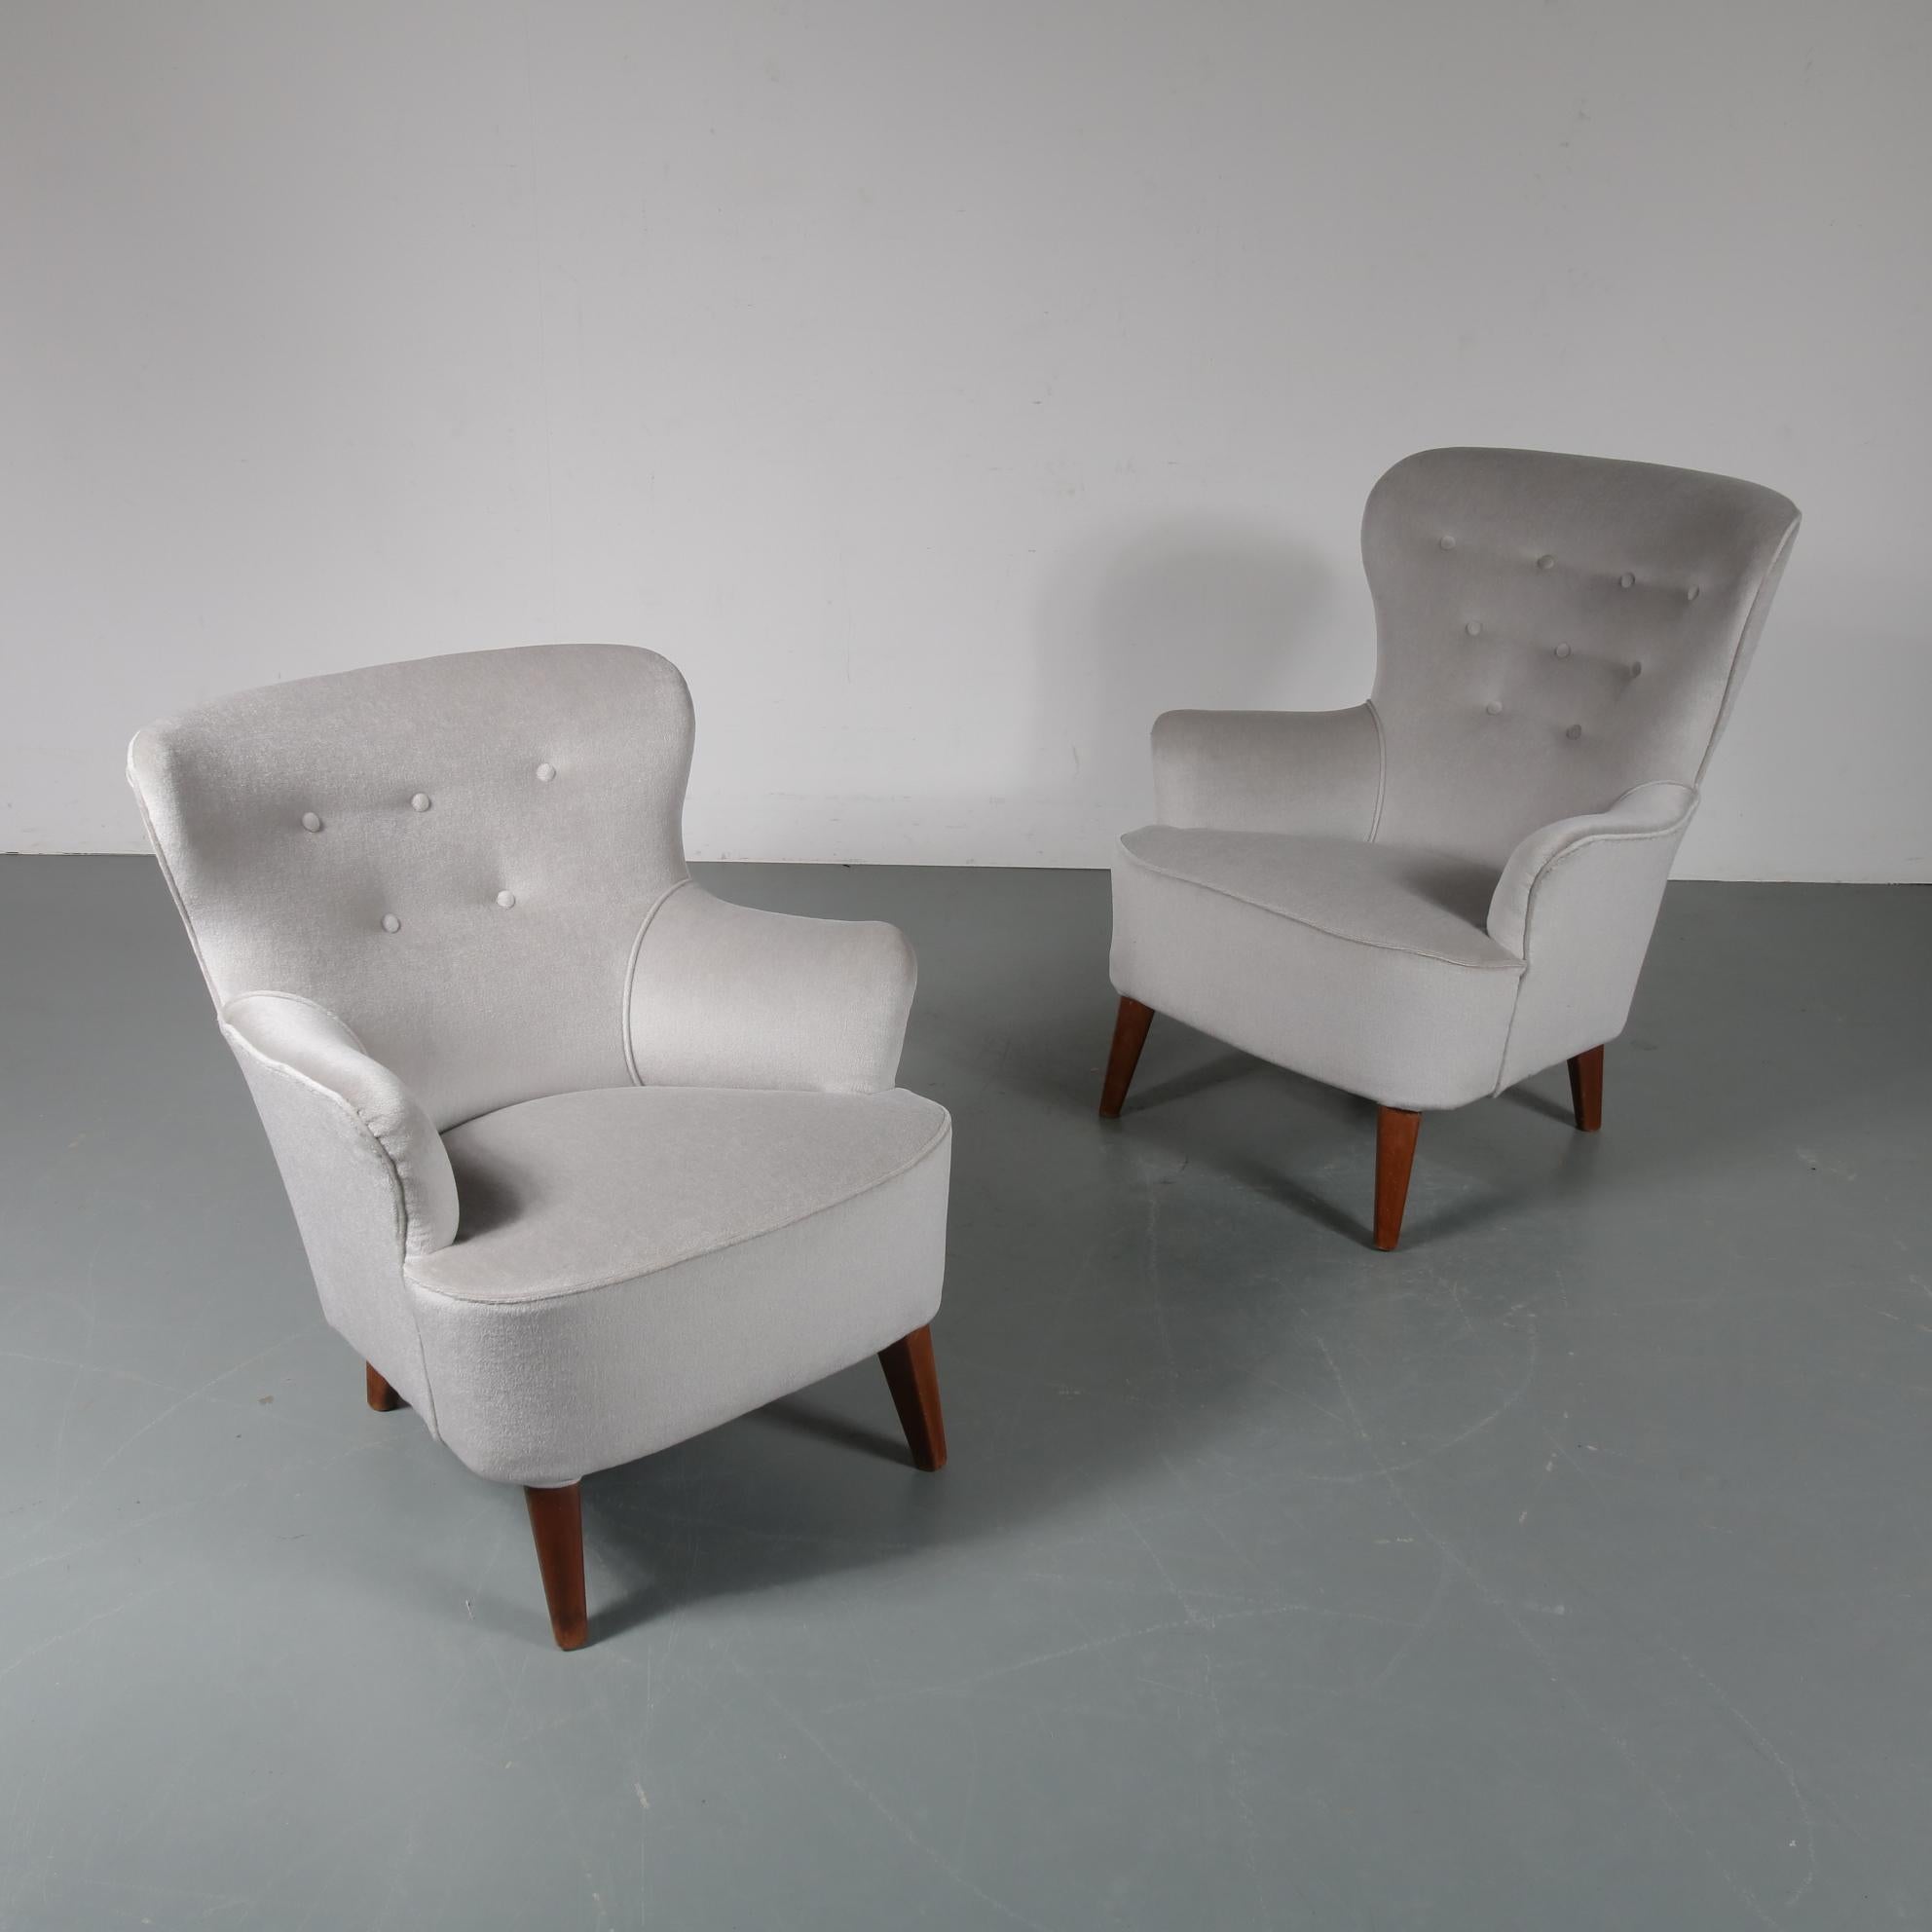 Dutch Pair of Theo Ruth Lounge Chairs for Artifort, the Netherlands, 1950